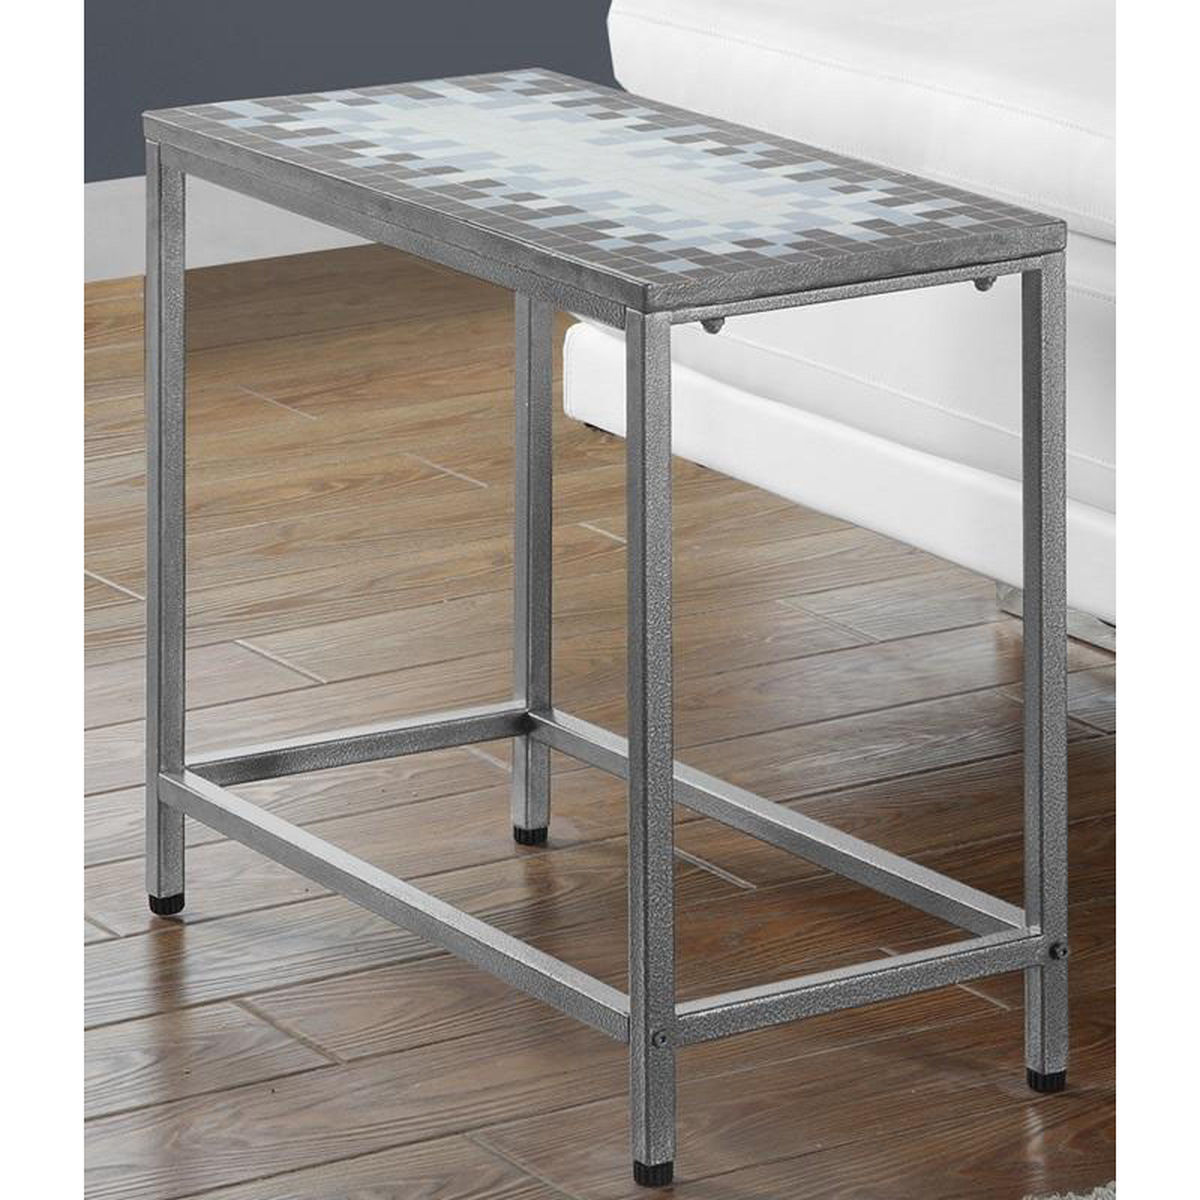 hammered metal accent table bizchair monarch specialties msp main silver our with gray and blue mosaic tile top antique drop leaf kitchen patio set clearance livingroom side